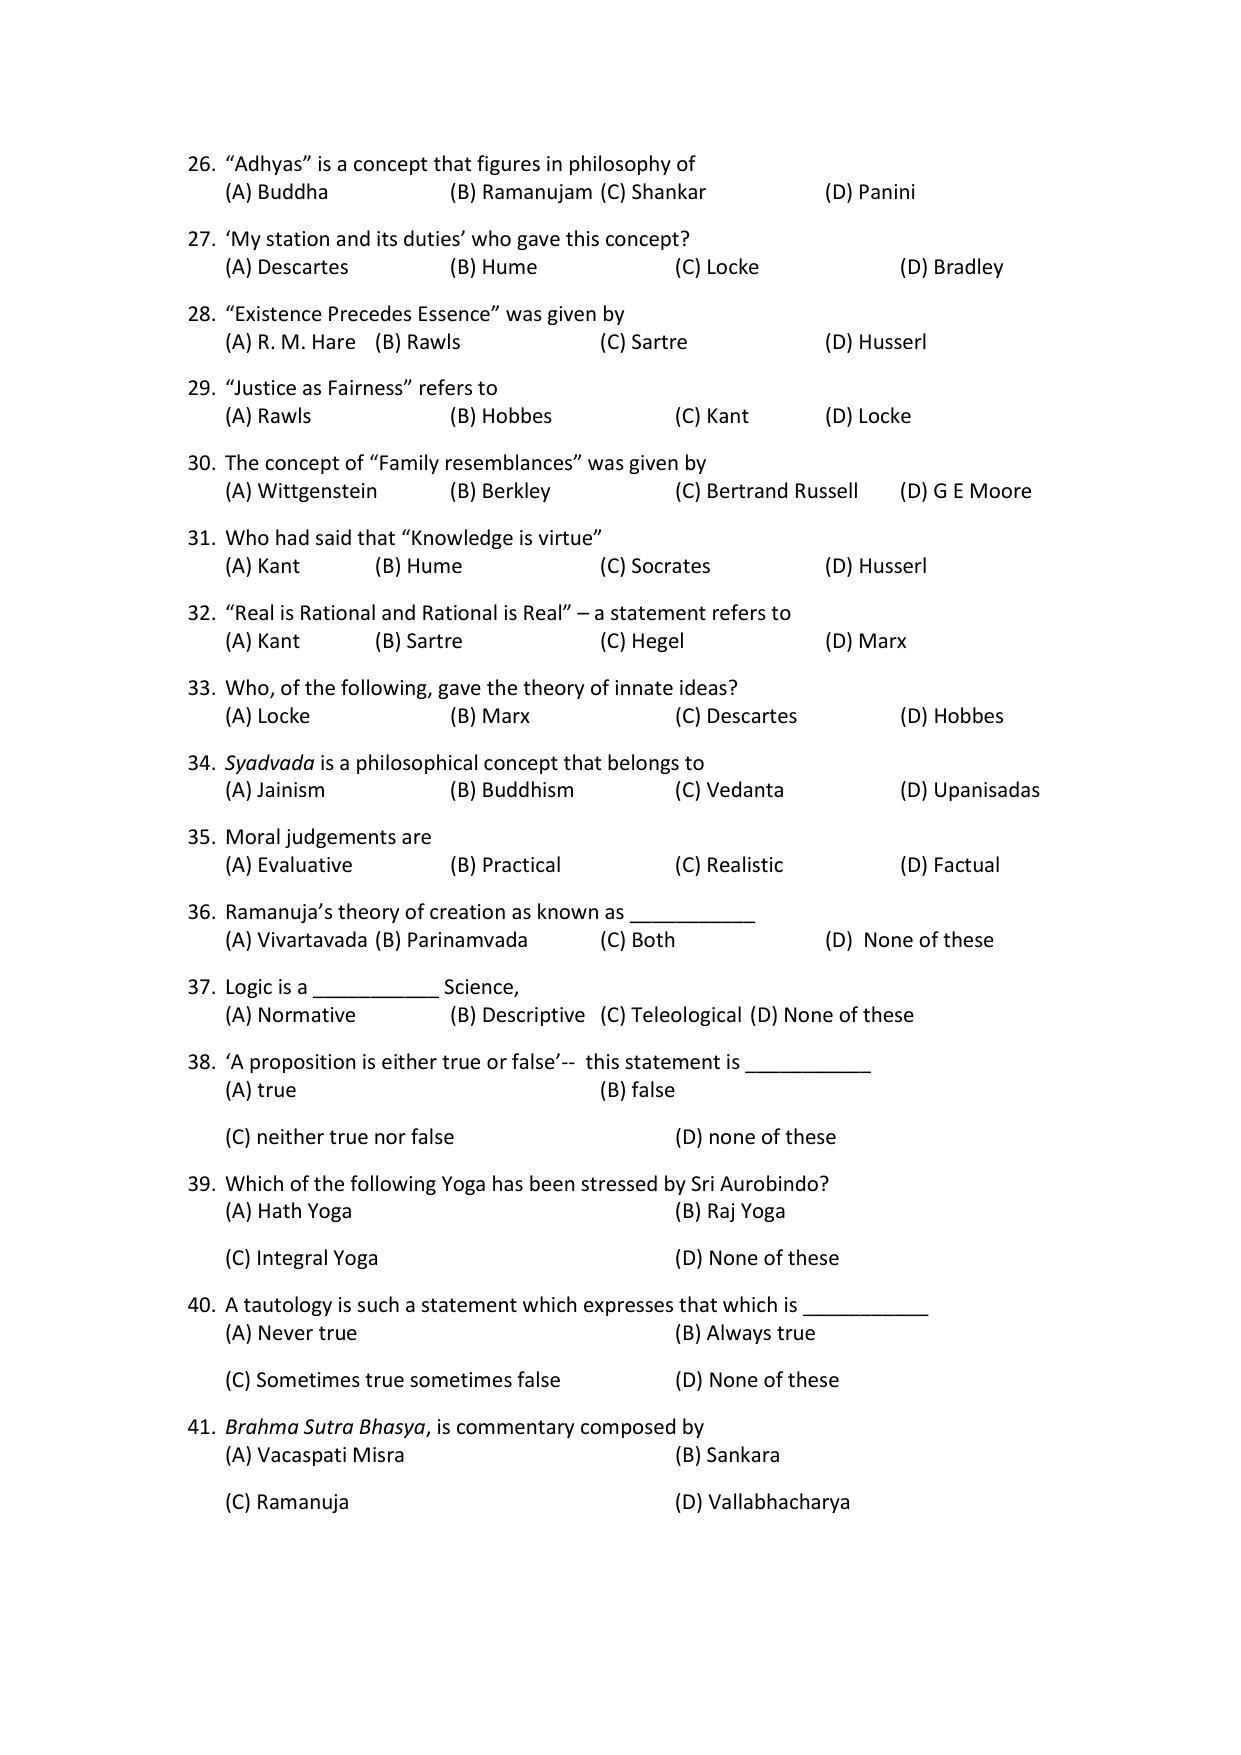 PU MPET Ancient Indian History & Archeology 2022 Question Papers - Page 24